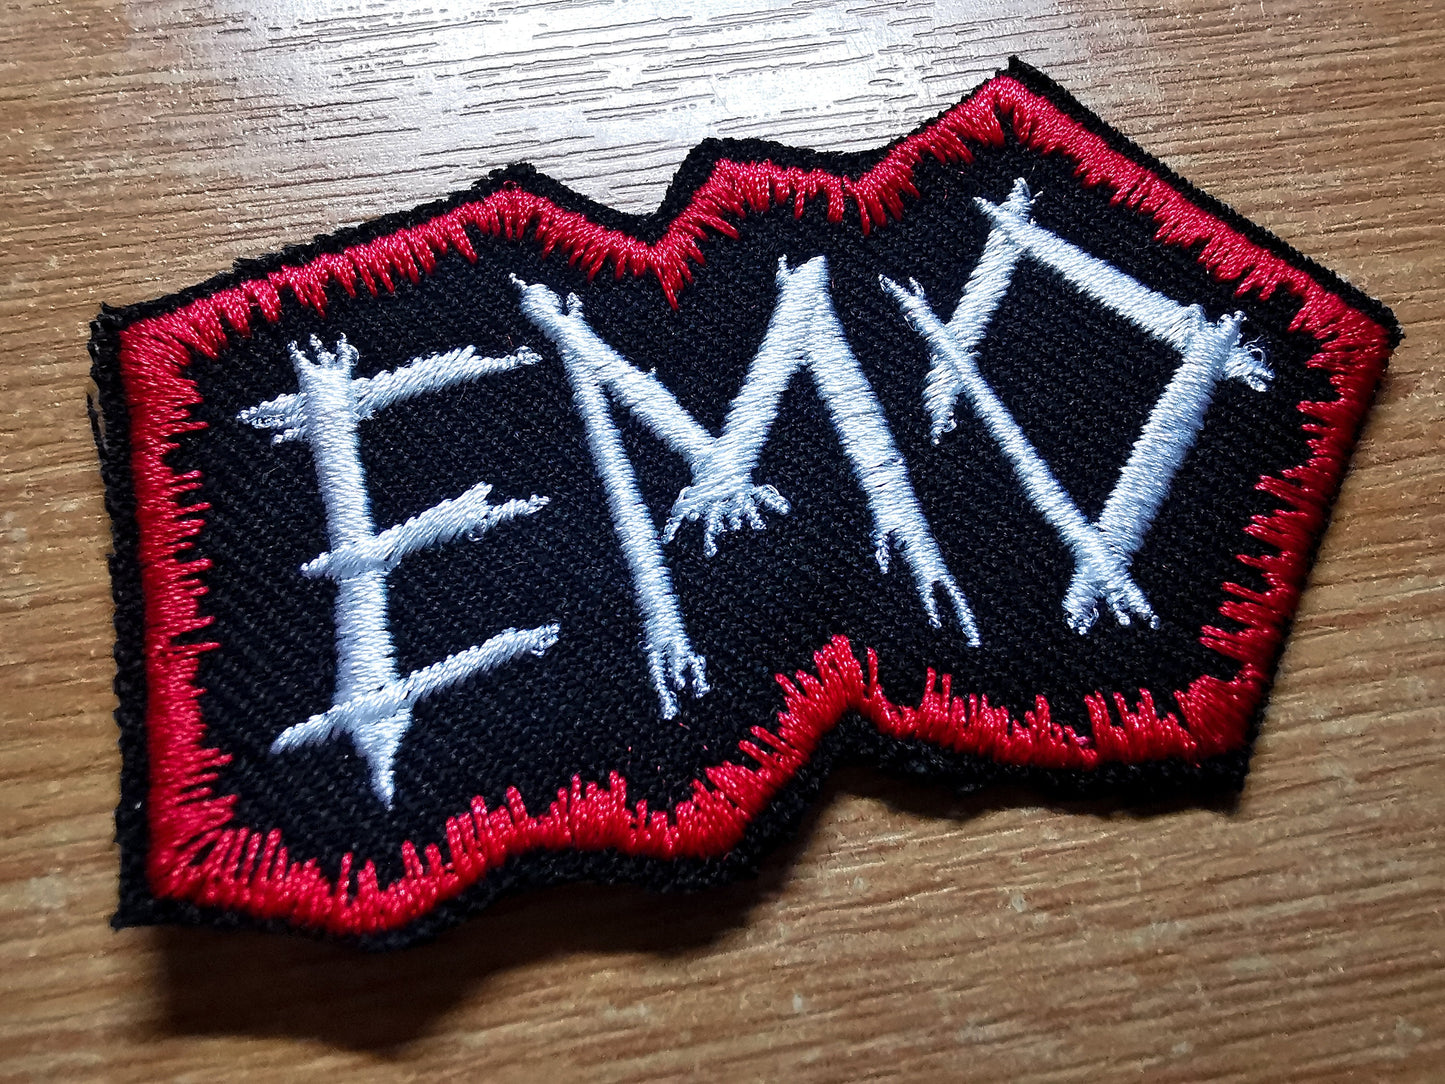 Emo Embroidered Patch Pop Punk Metalcore 00s Culture Throwback